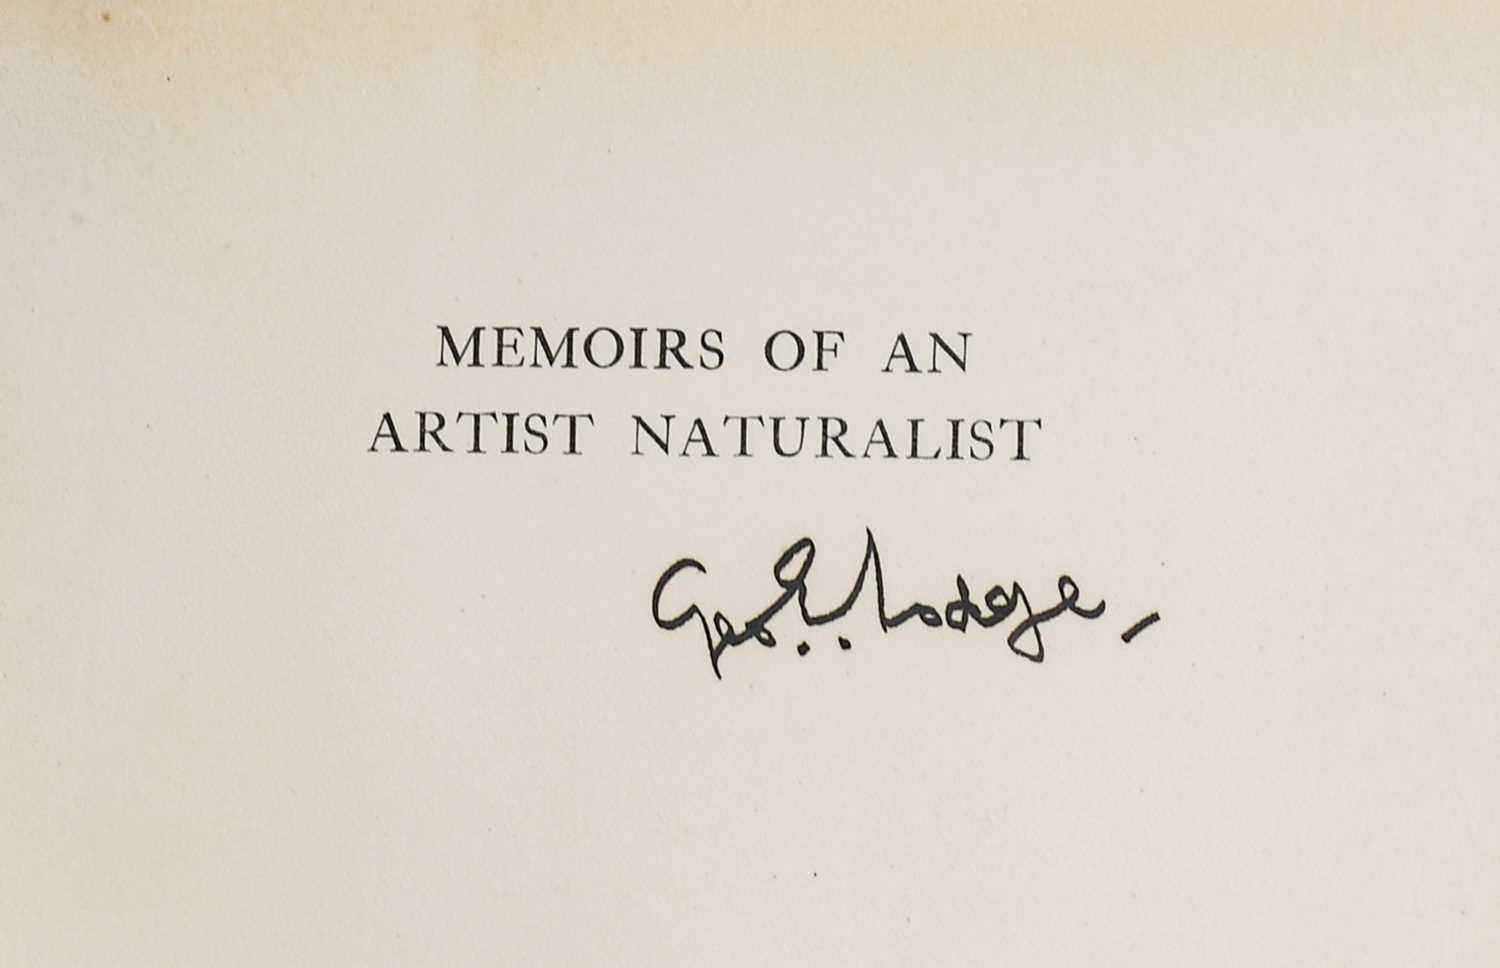 Lot 63 - Lodge (George E., 1860-1954). Memoirs of an Artist Naturalist, 1946, & 26 others, all signed